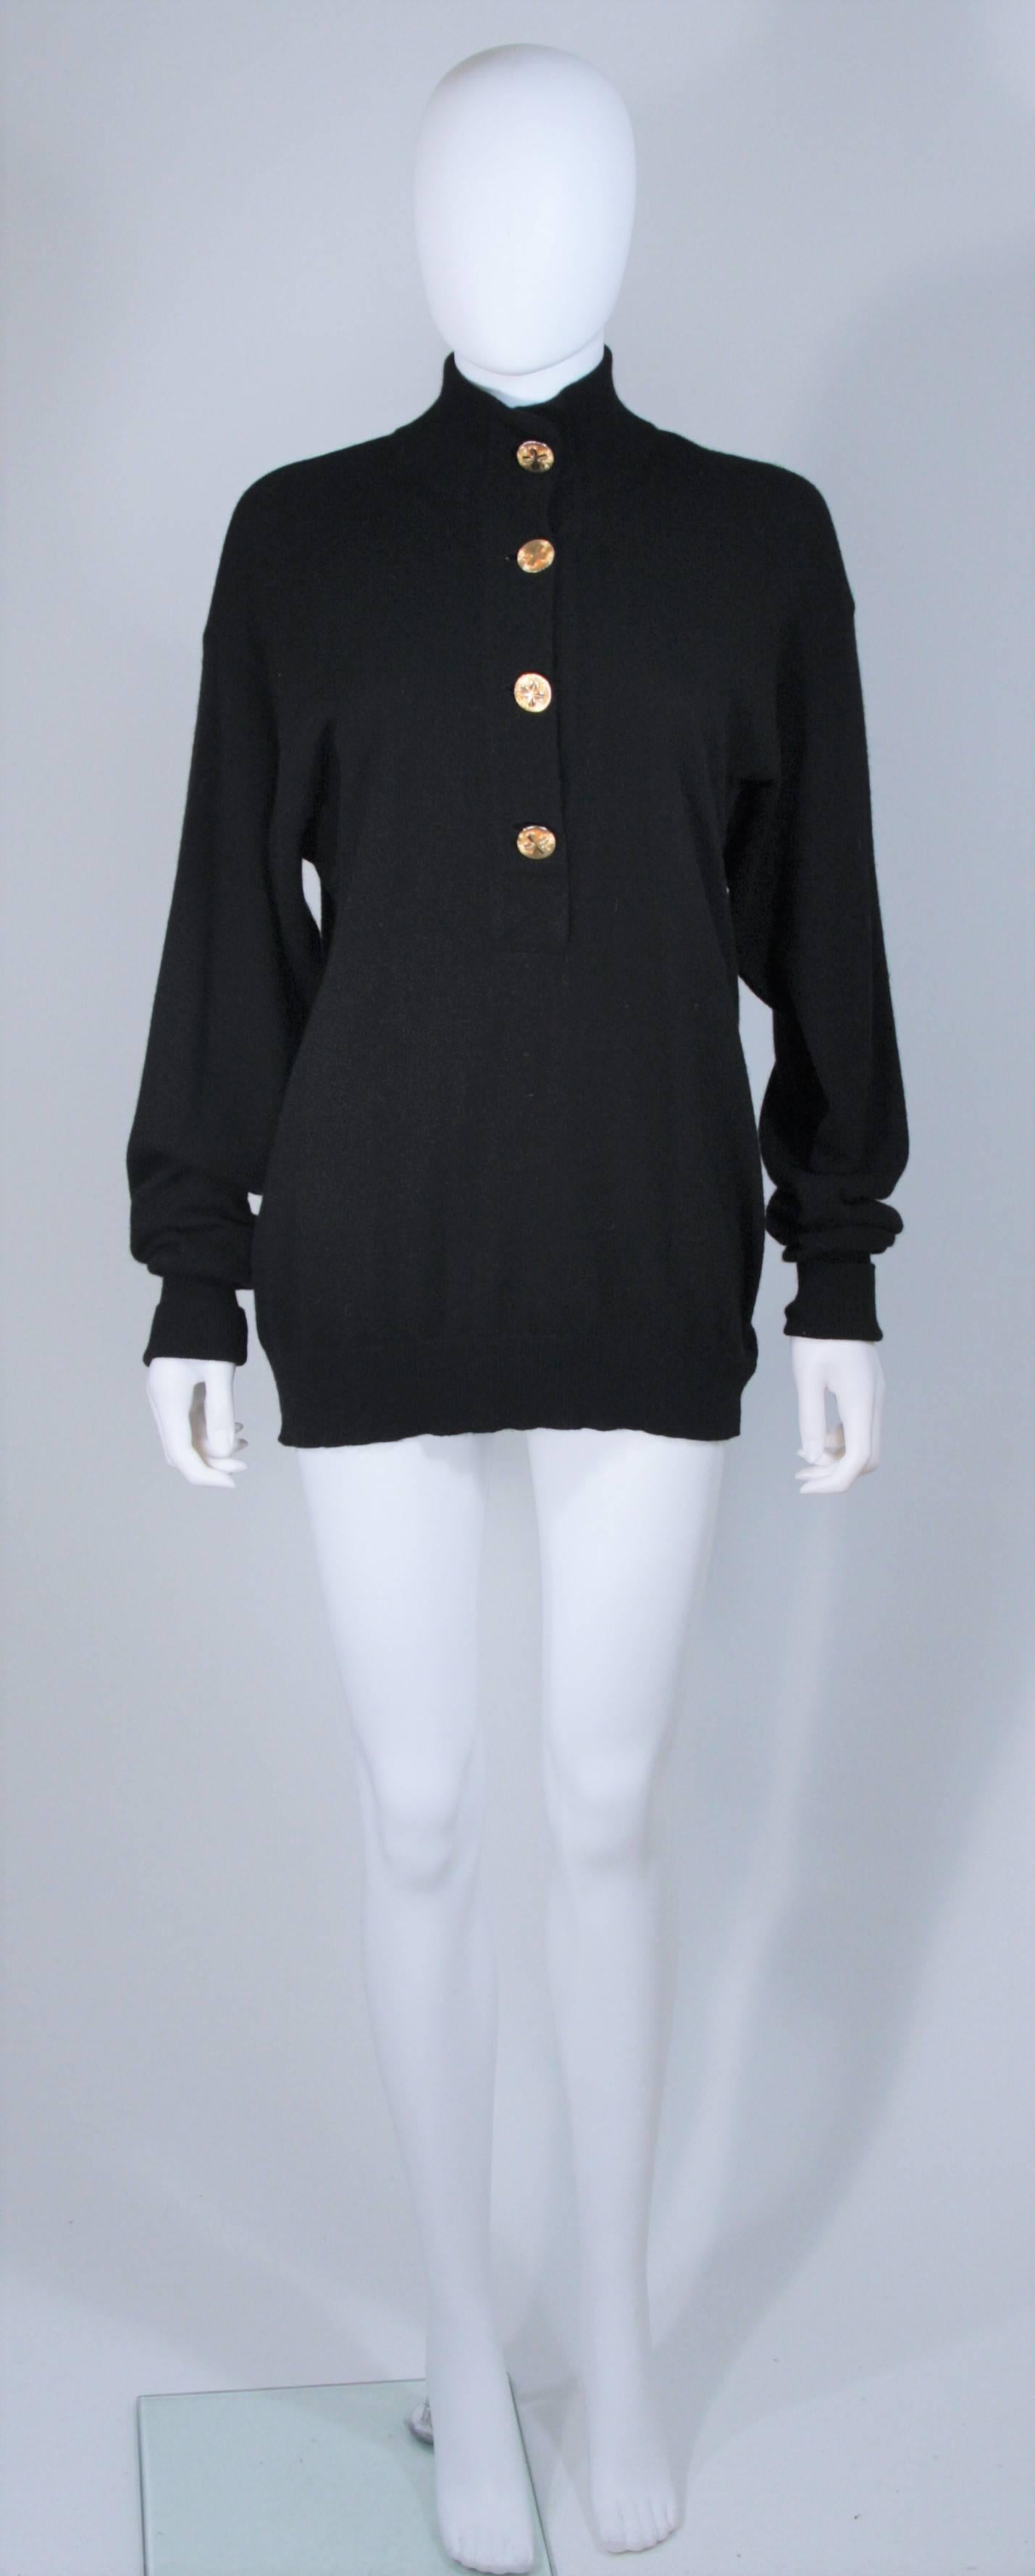  This Chanel sweater is composed of a black cashmere and features gold center front buttons. There is a mock neck style and fold over ribbed sleeves. In excellent vintage condition. 

**Please cross-reference measurements for personal